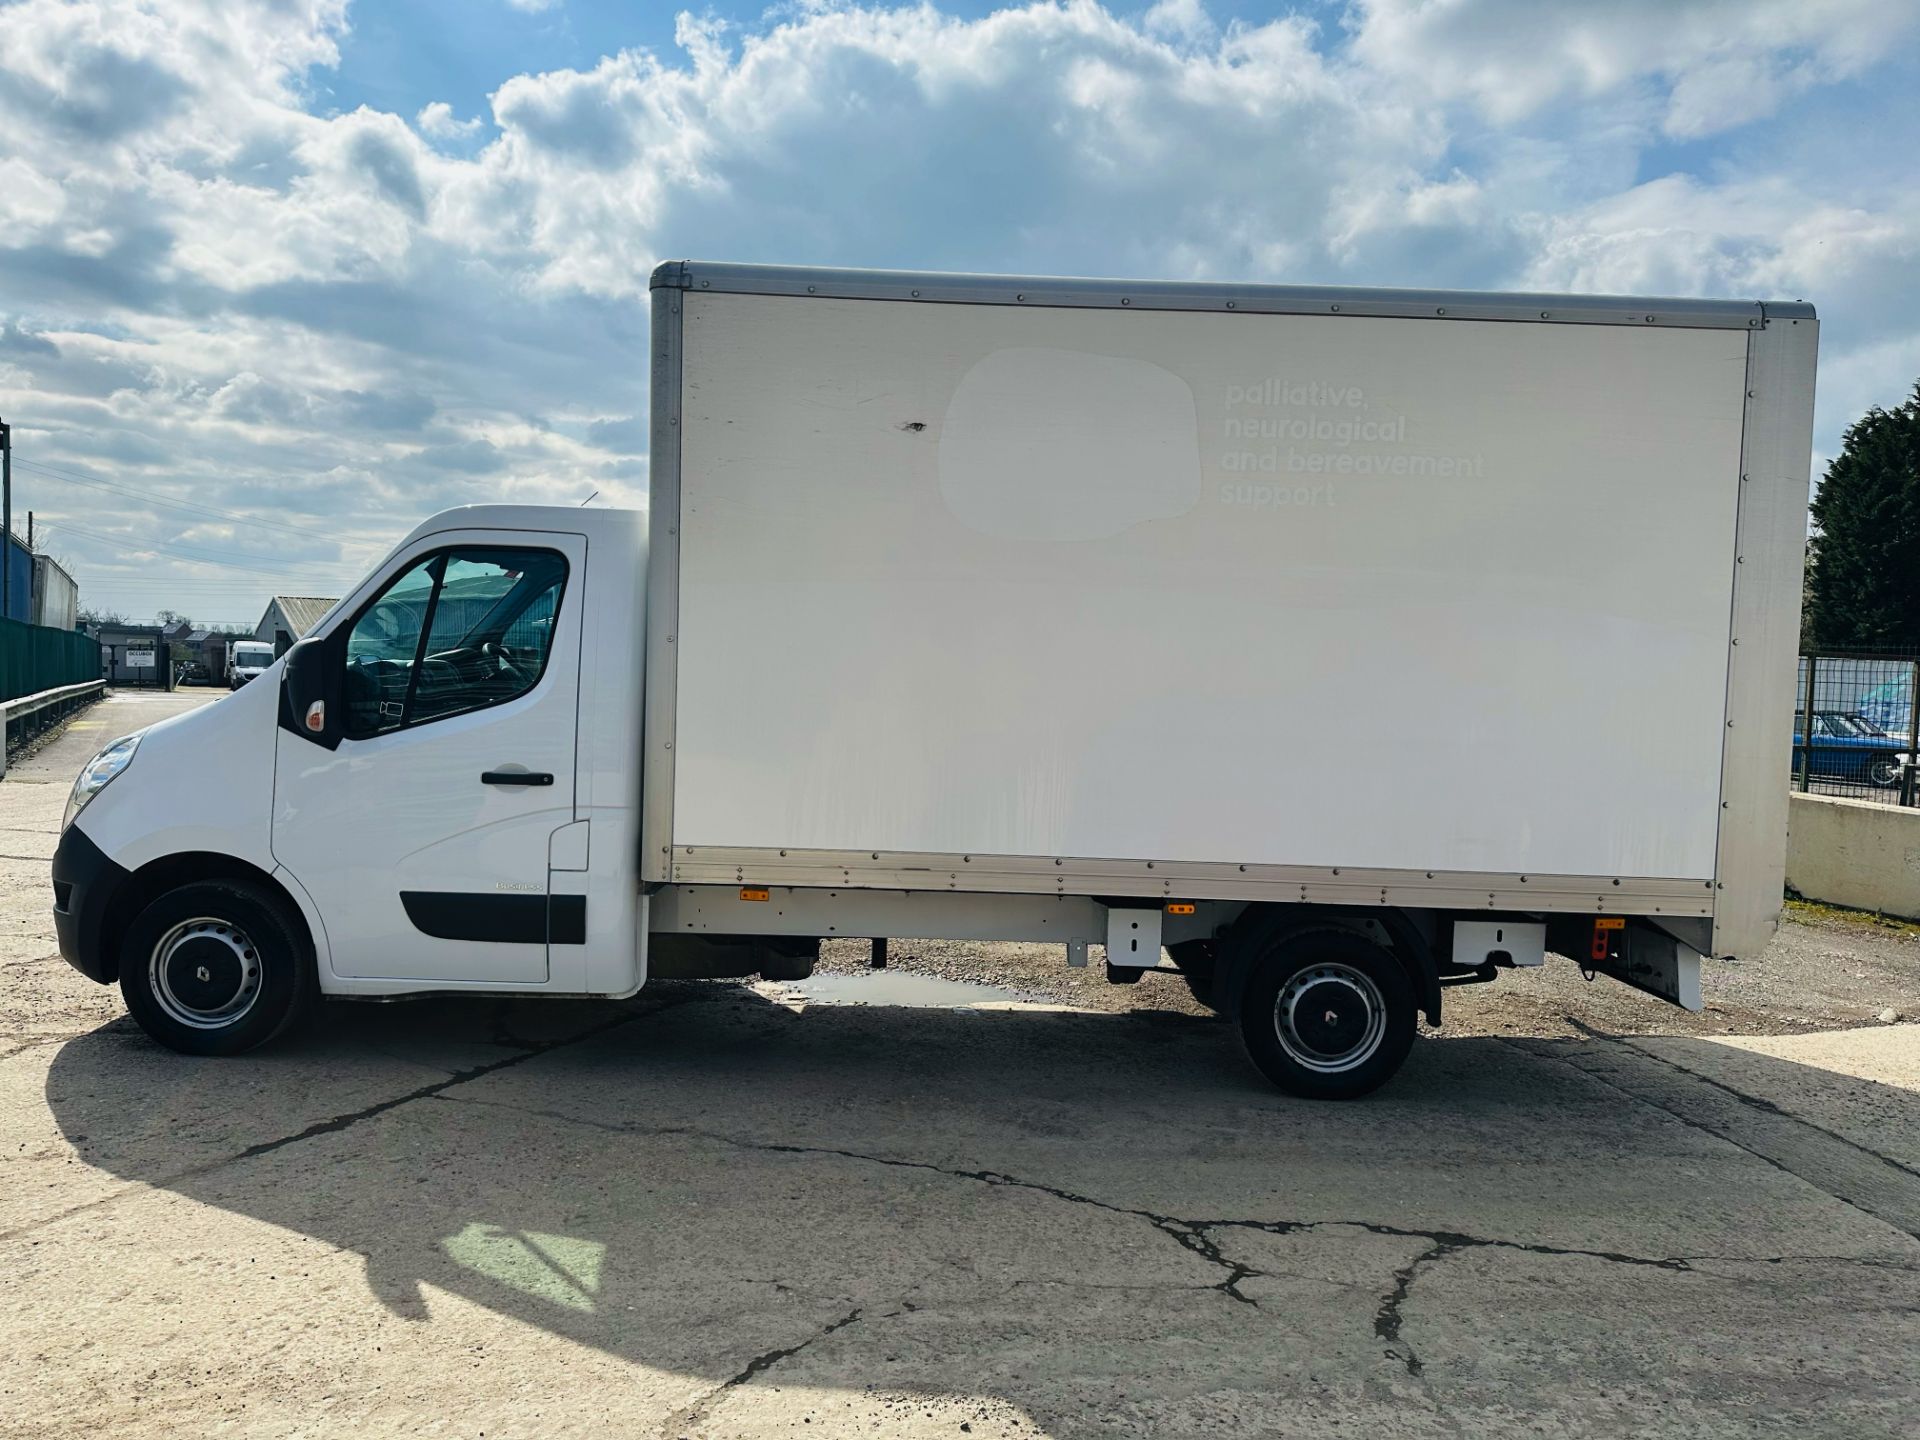 Renault Master 2.3 DCI 130 Business Edition Lwb (Luton / Box Van) - 2019 Model - Euro 6 - Tail Lift - Image 6 of 27